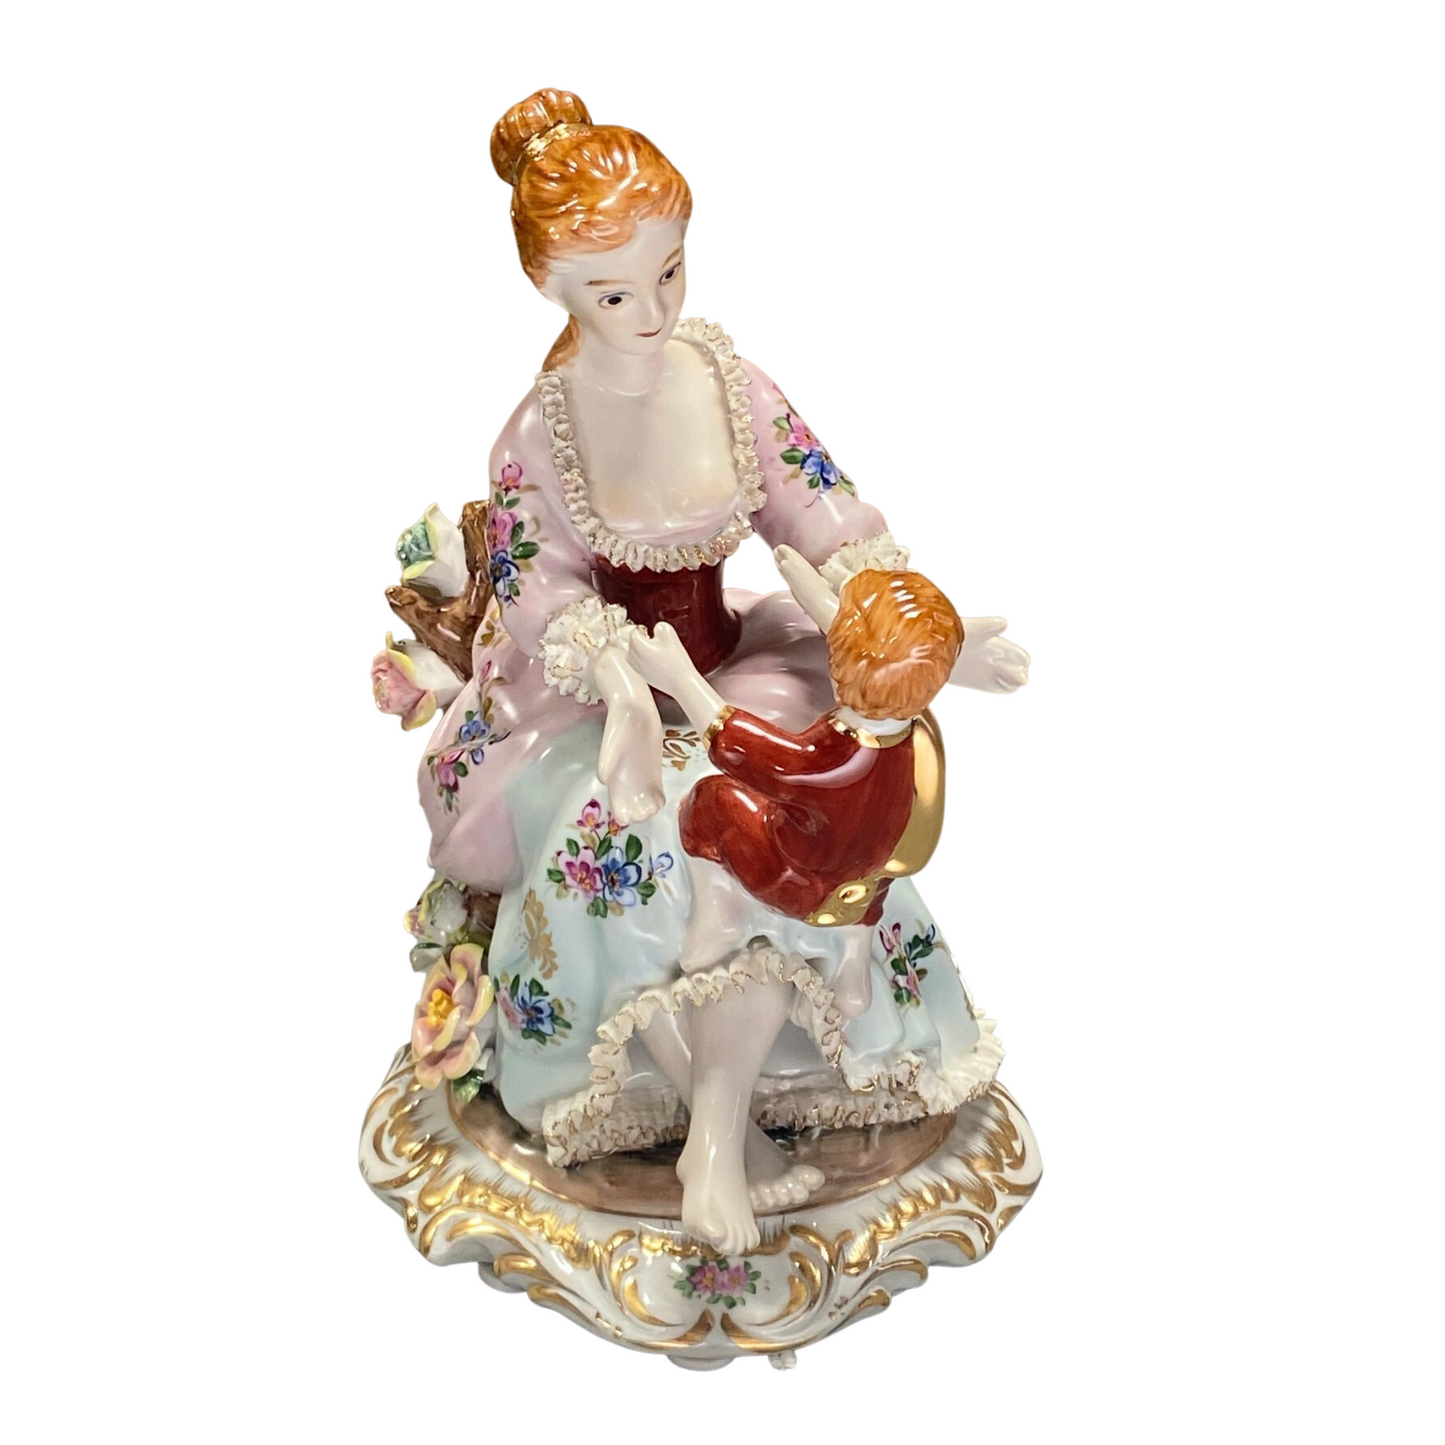 Hand-painted Mother Playing With Her Child Porcelain Figurine